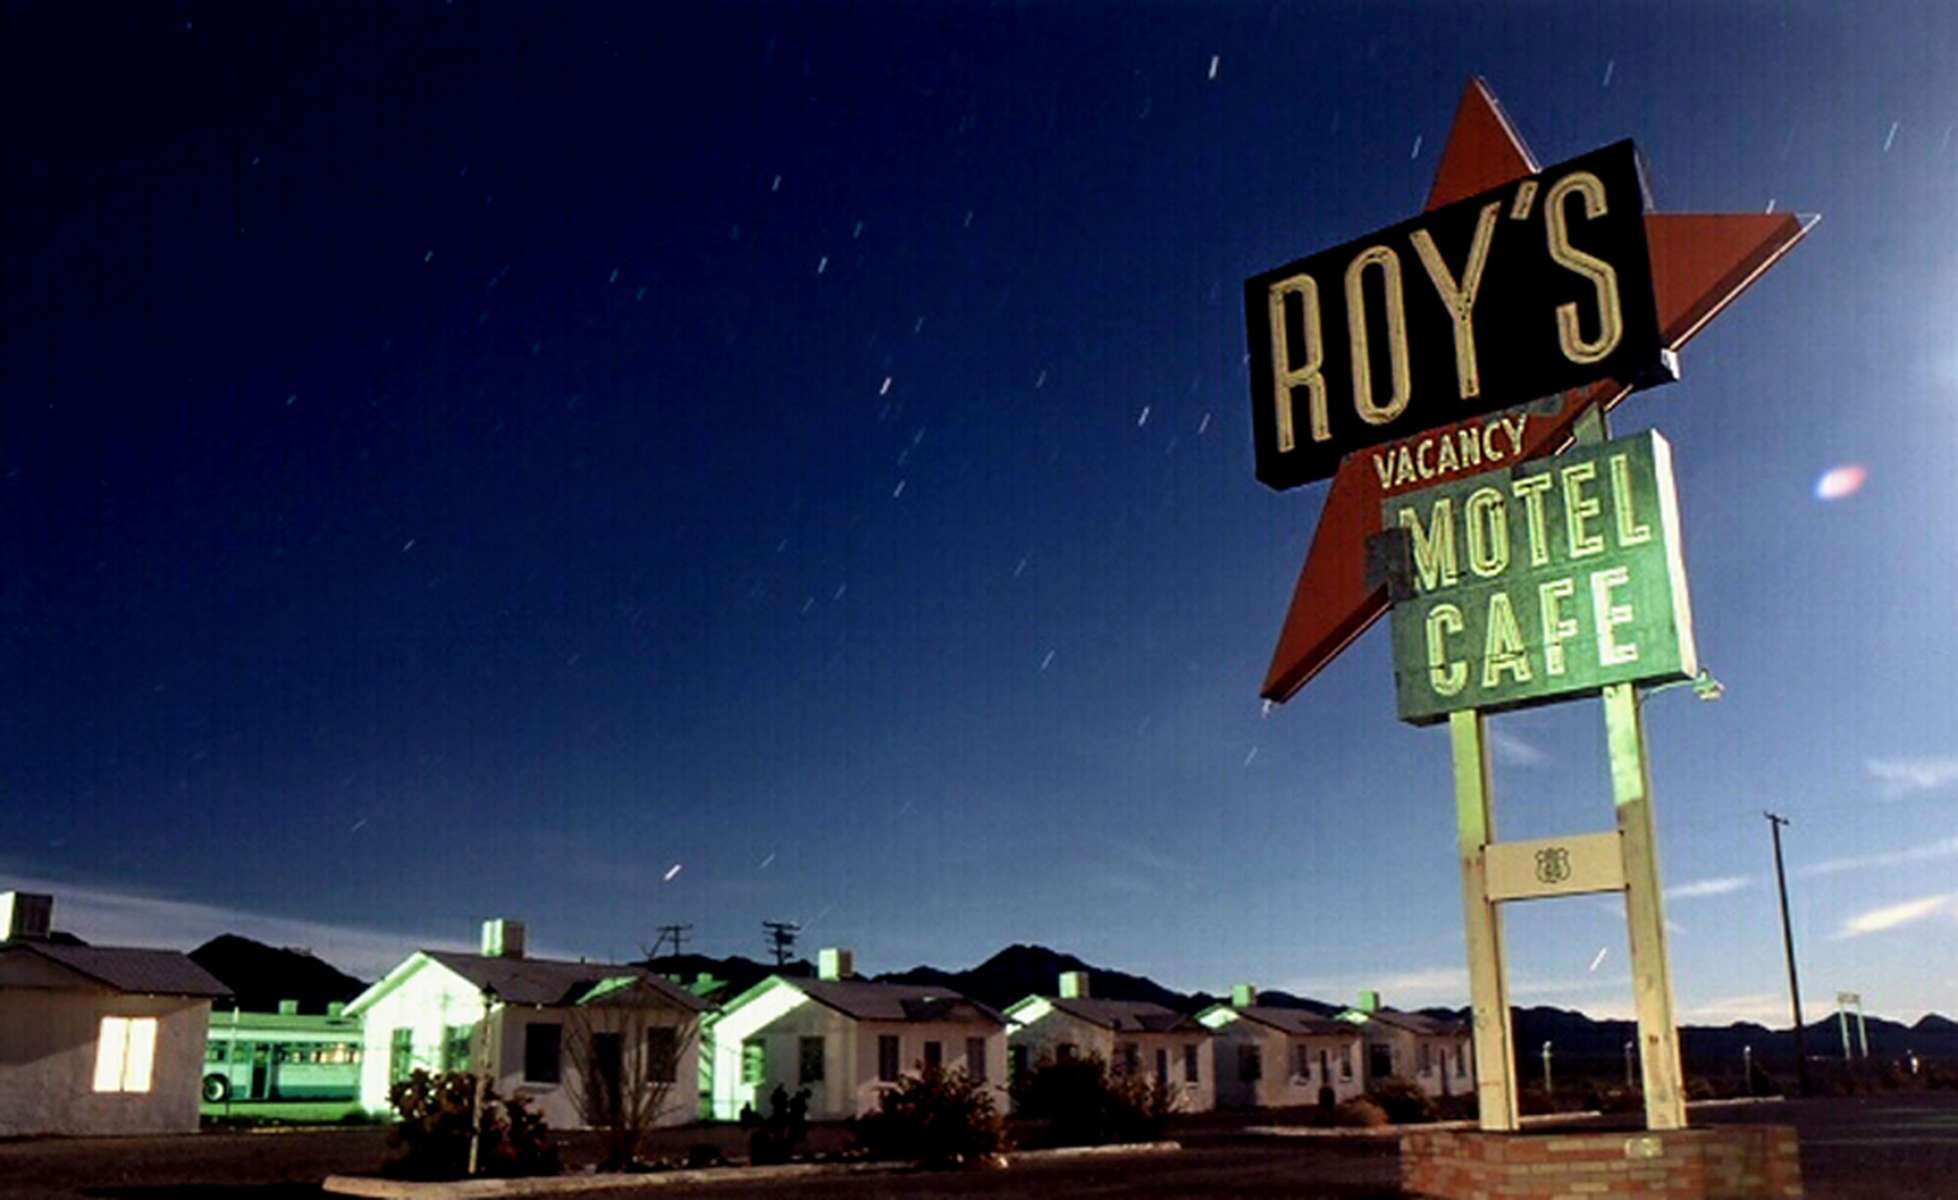 Roy's Motel and Cafe is located on Route 66. Photo taken between 1999 and 2010. 